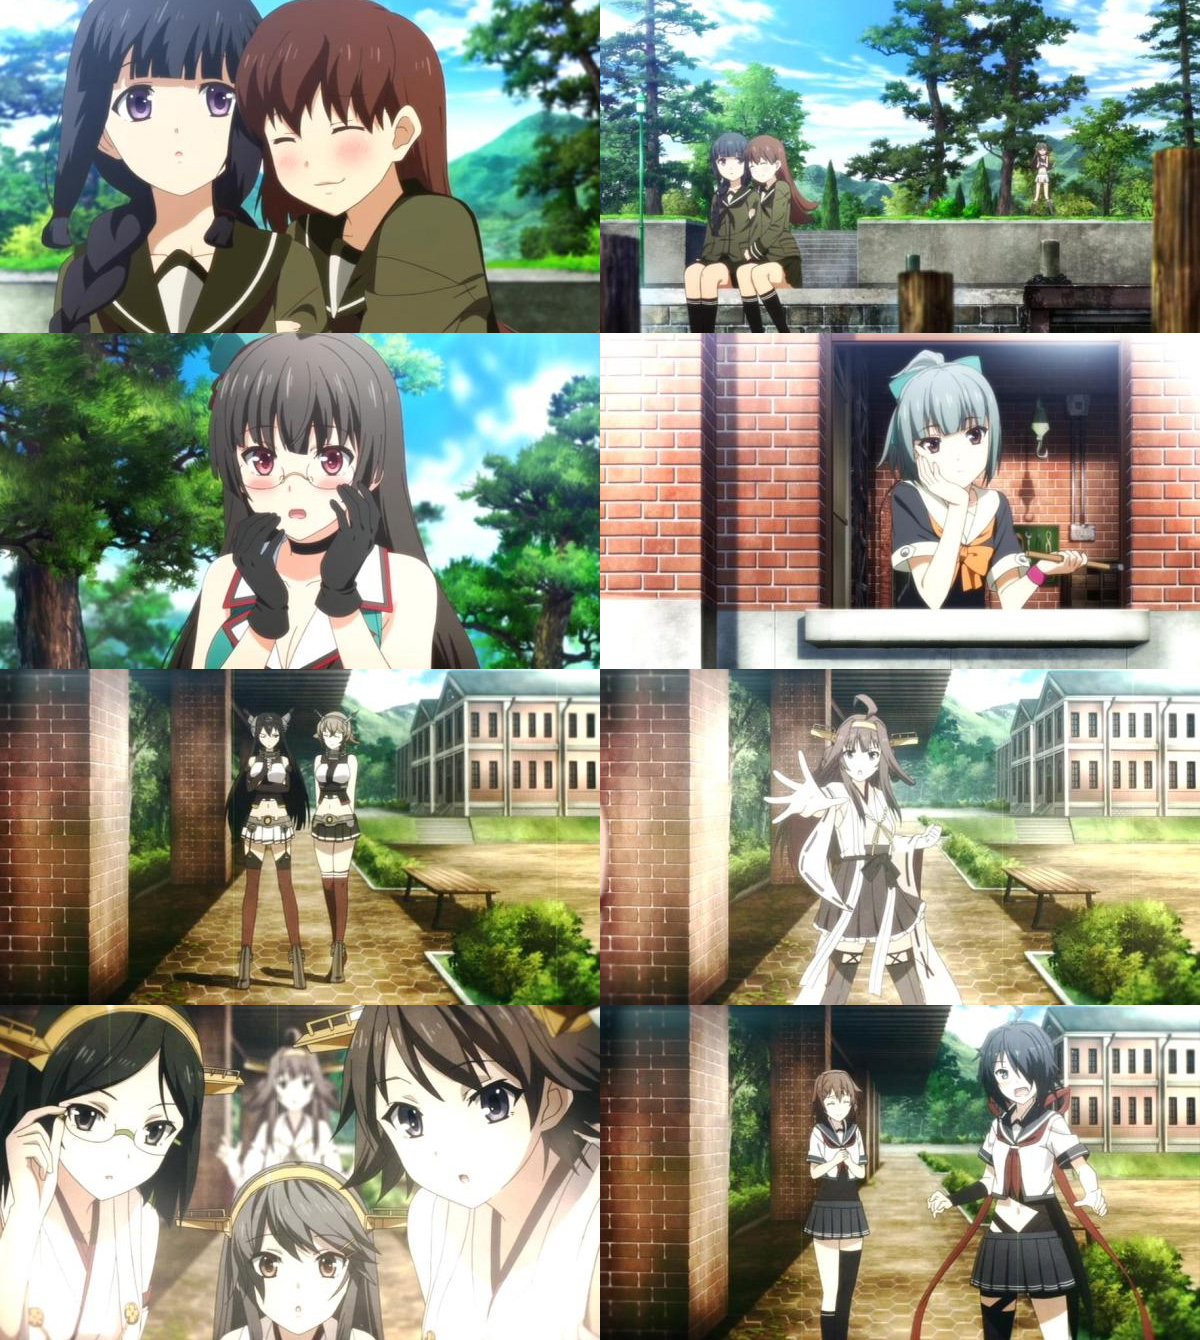 2016-Kantai-Collection-Kan-Colle-Anime-Film-PV-Images-2